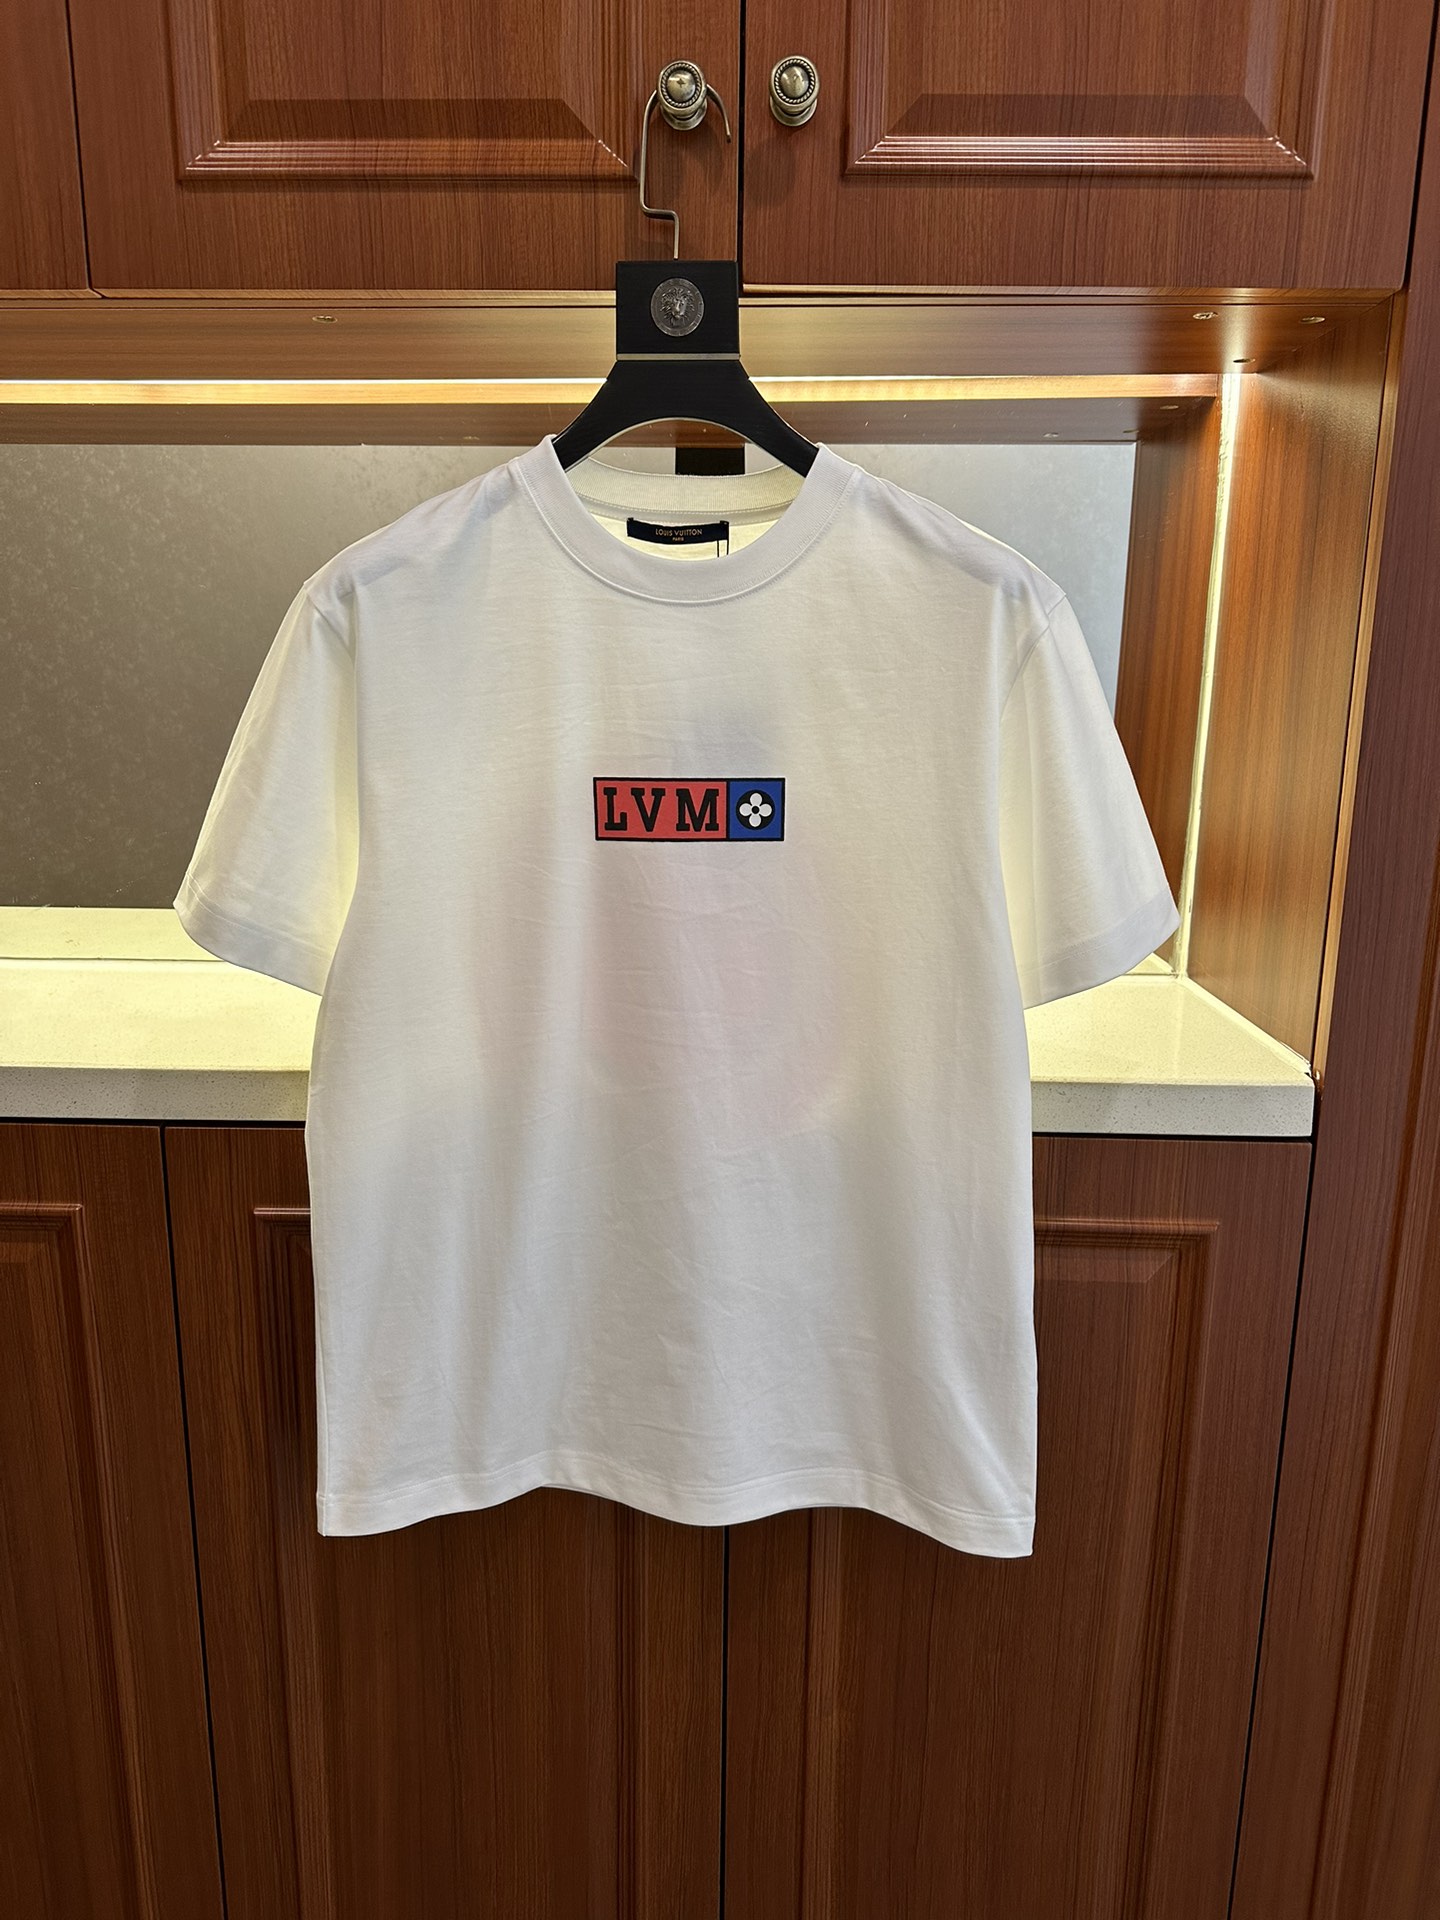 Louis Vuitton mirror quality
 Clothing T-Shirt Black White Combed Cotton Spring/Summer Collection